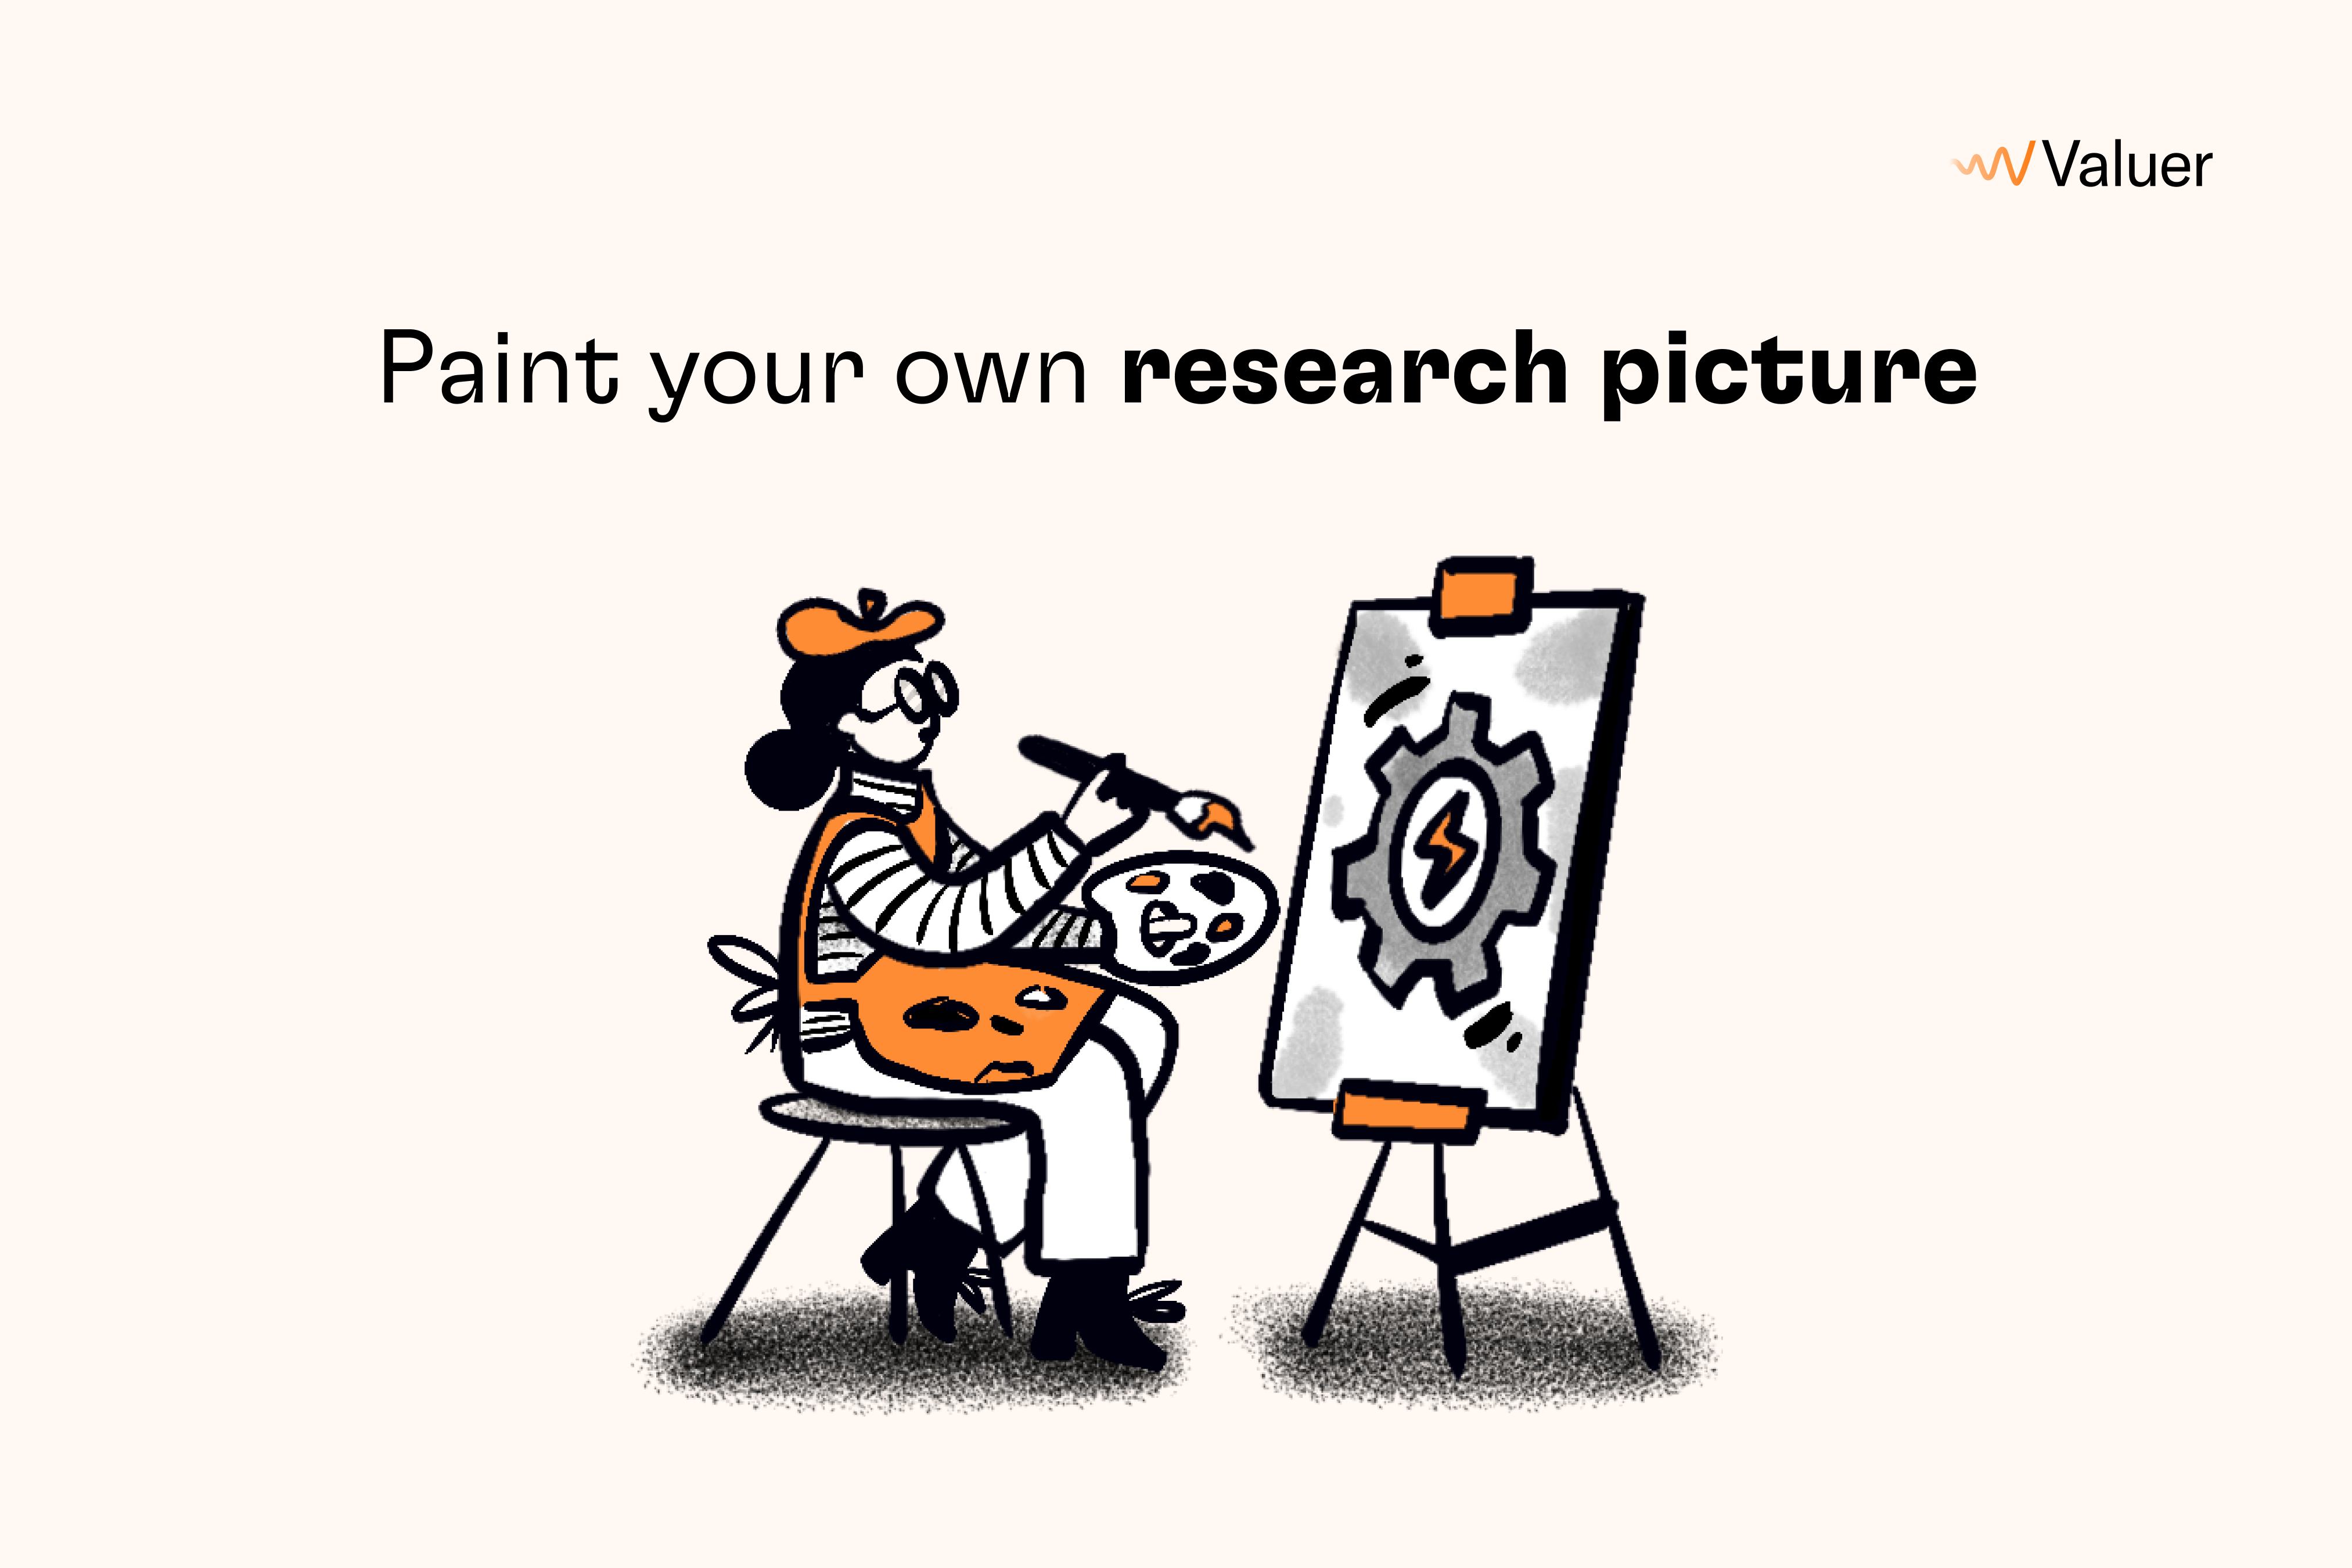 Paint your own research picture